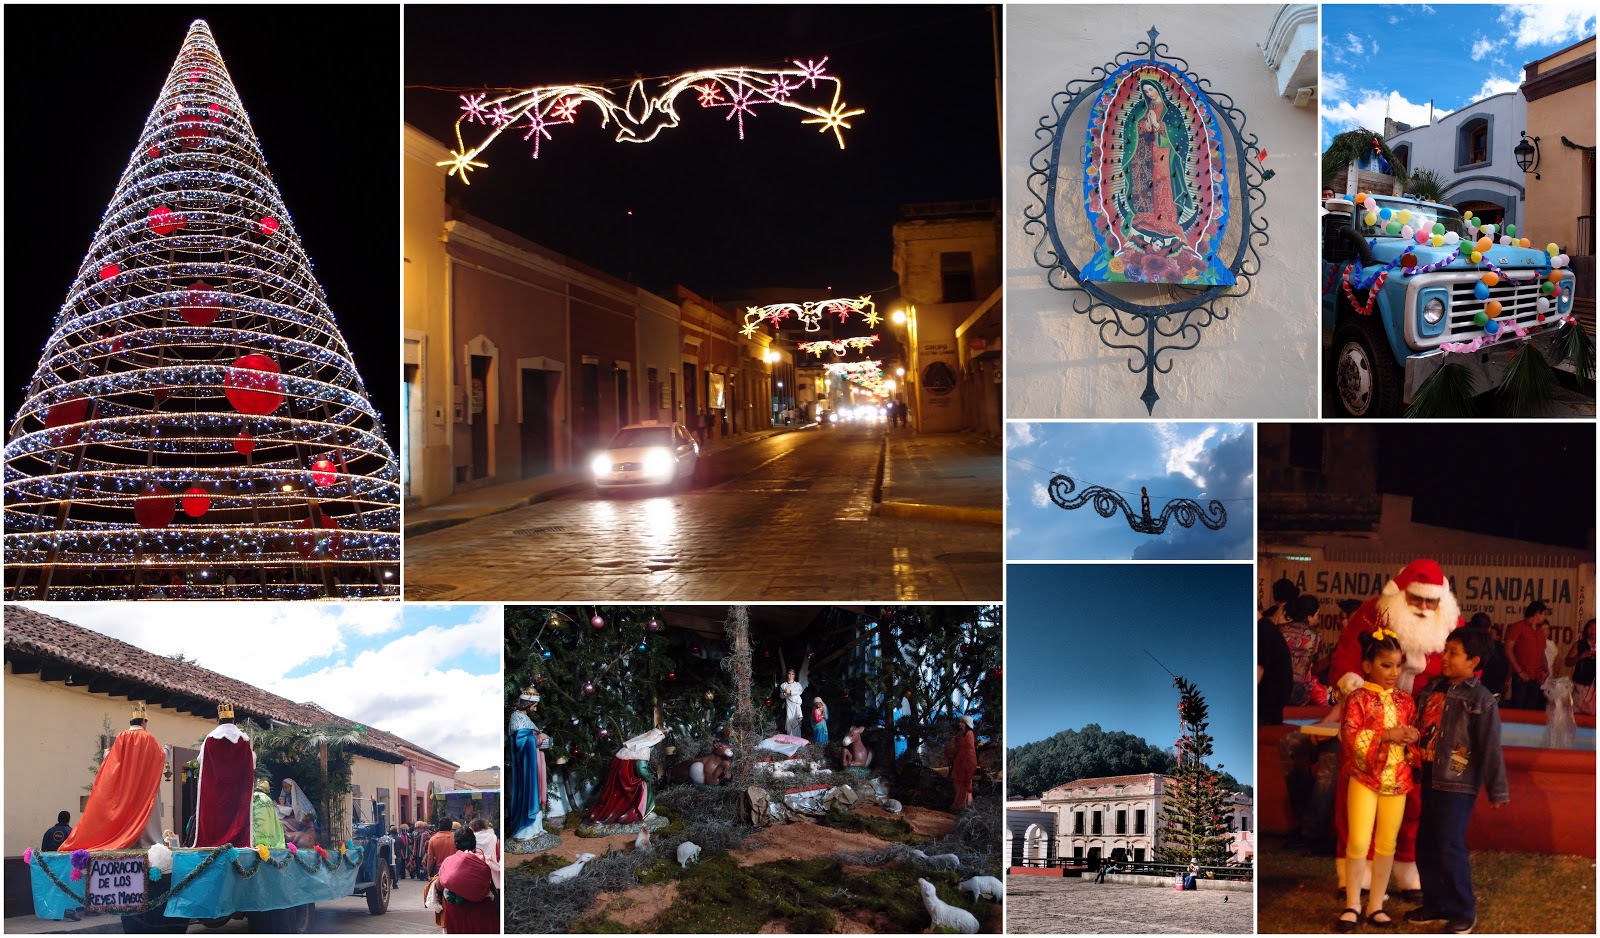 A collage of my "Christmas stuff in Mexico"